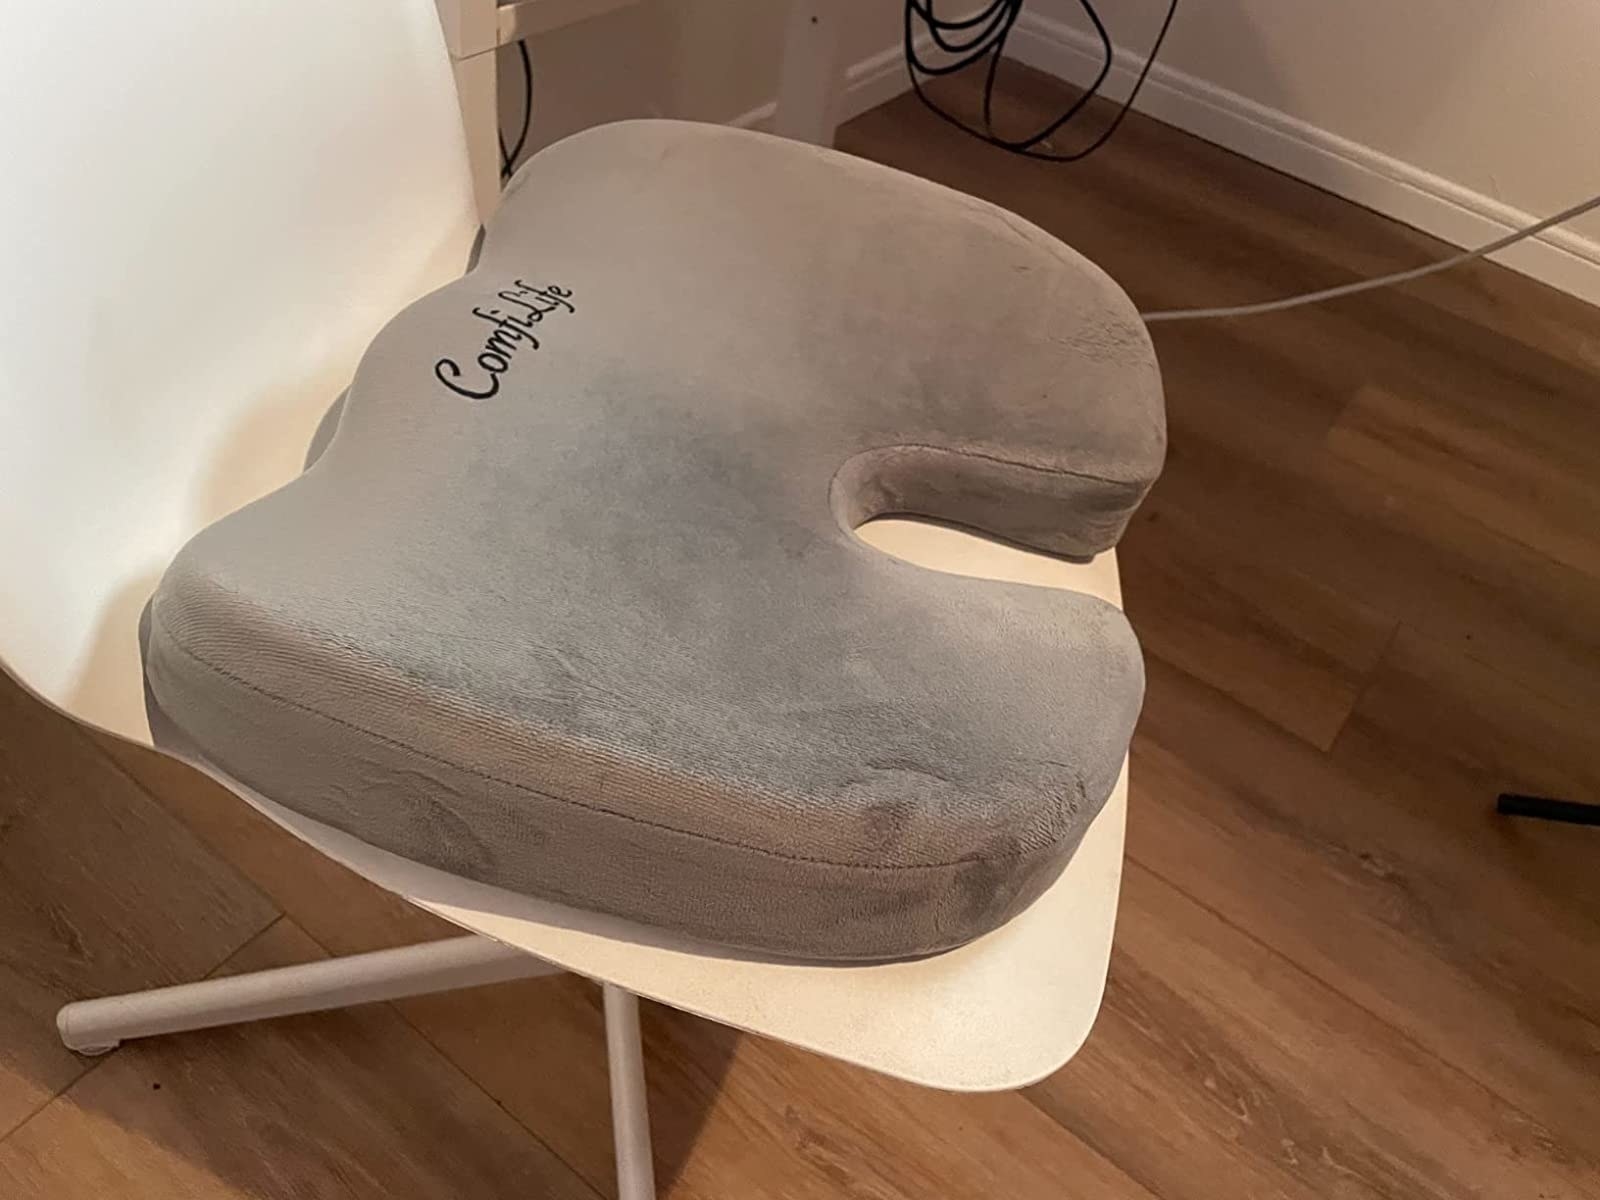 Reviewer image of cushion on a desk chair